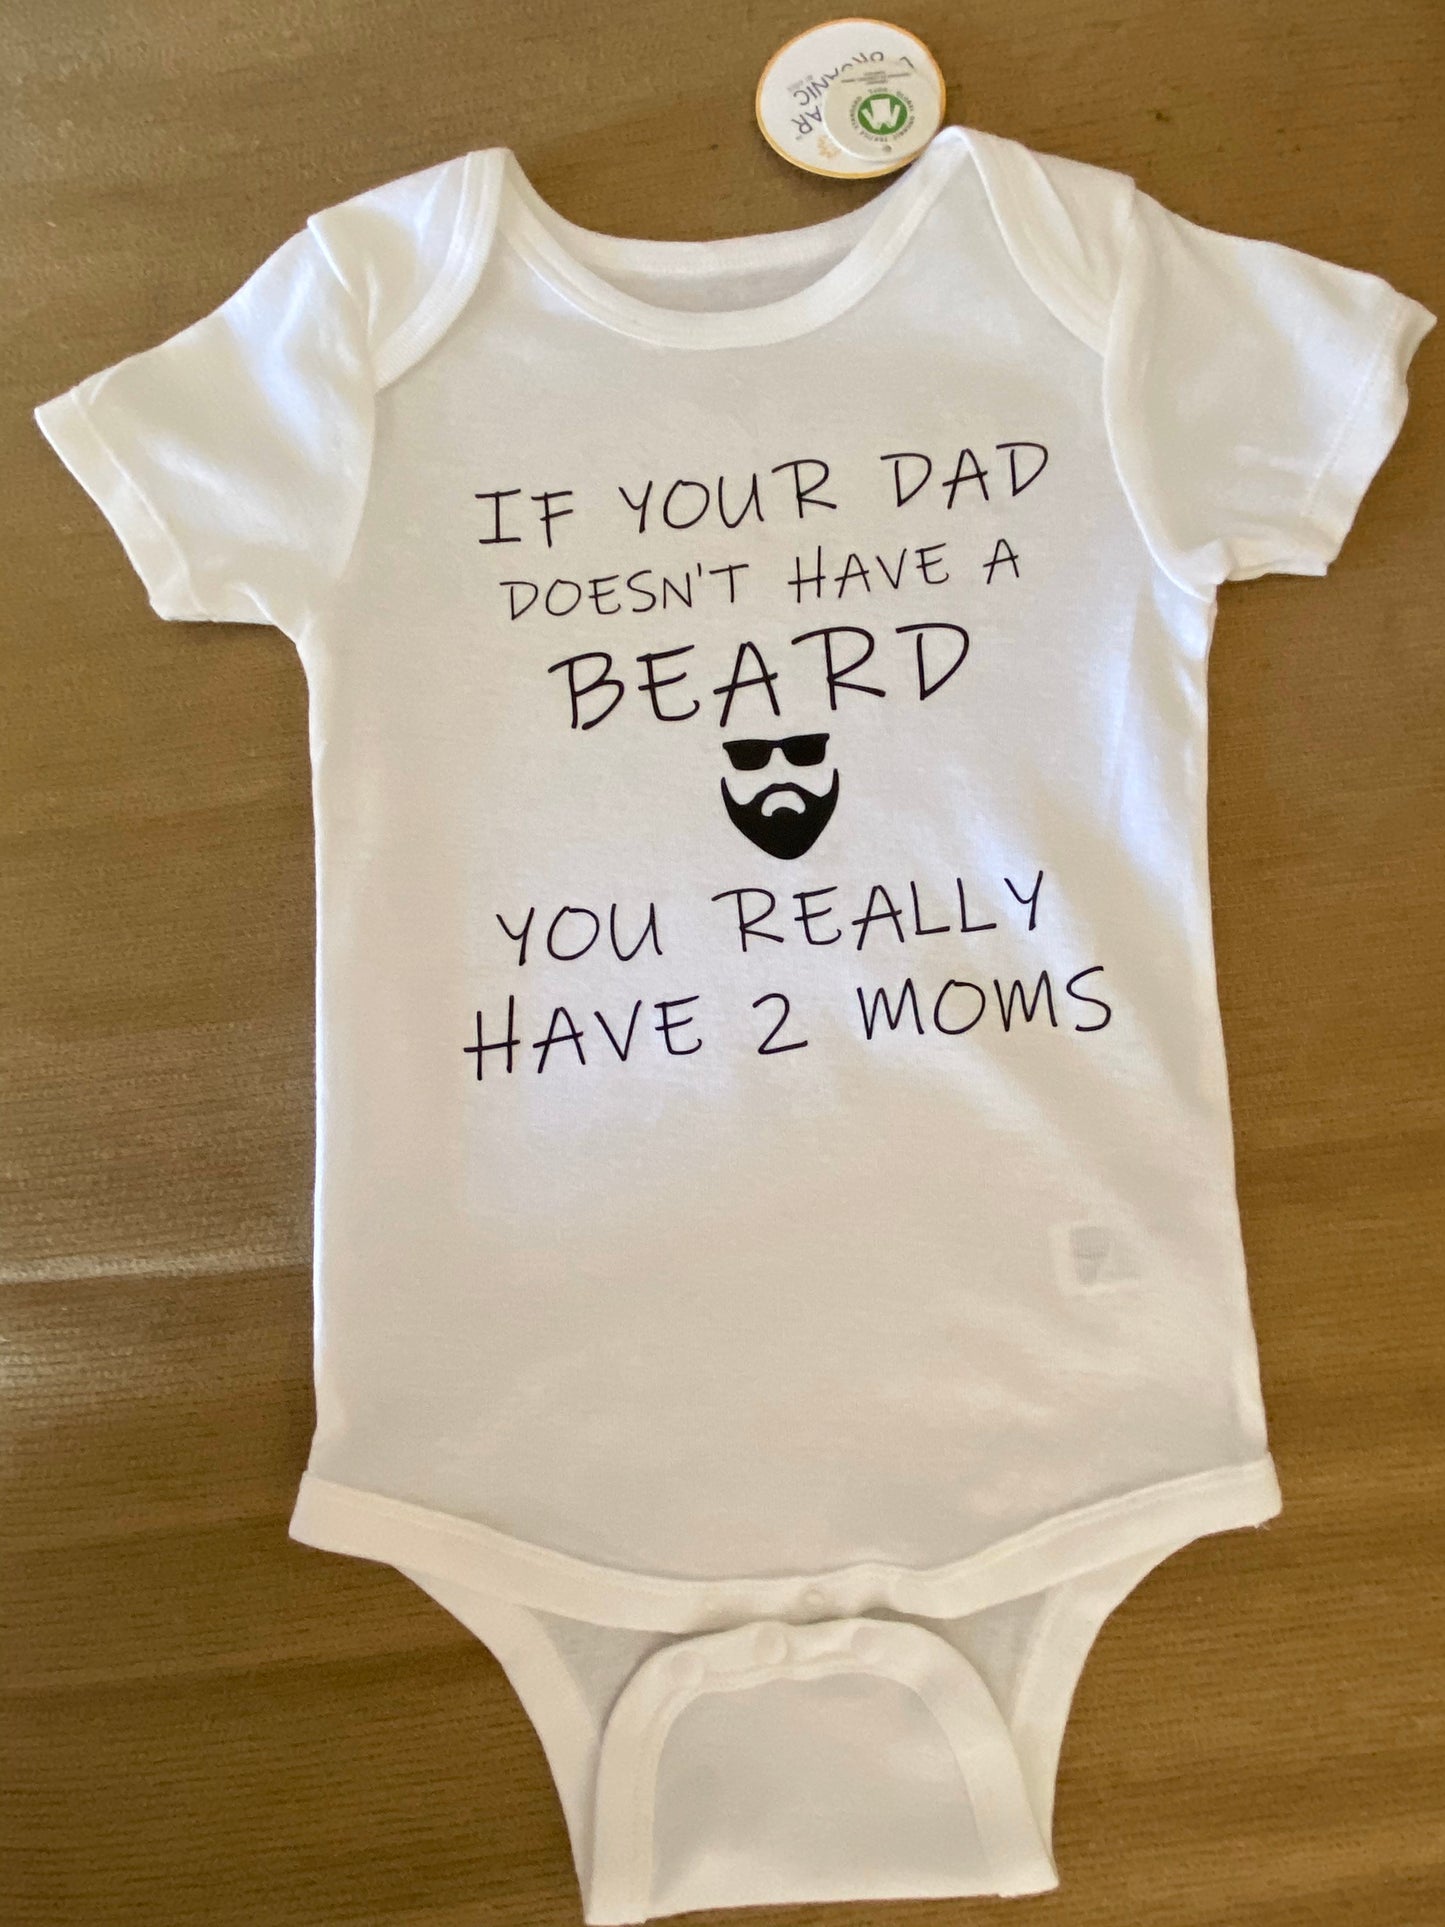 If your Dad Doesn't Have a BEARD you really have 2 Moms / fathers day shirt / dad shirt / father shirt / beard / beard shirt / beard gift